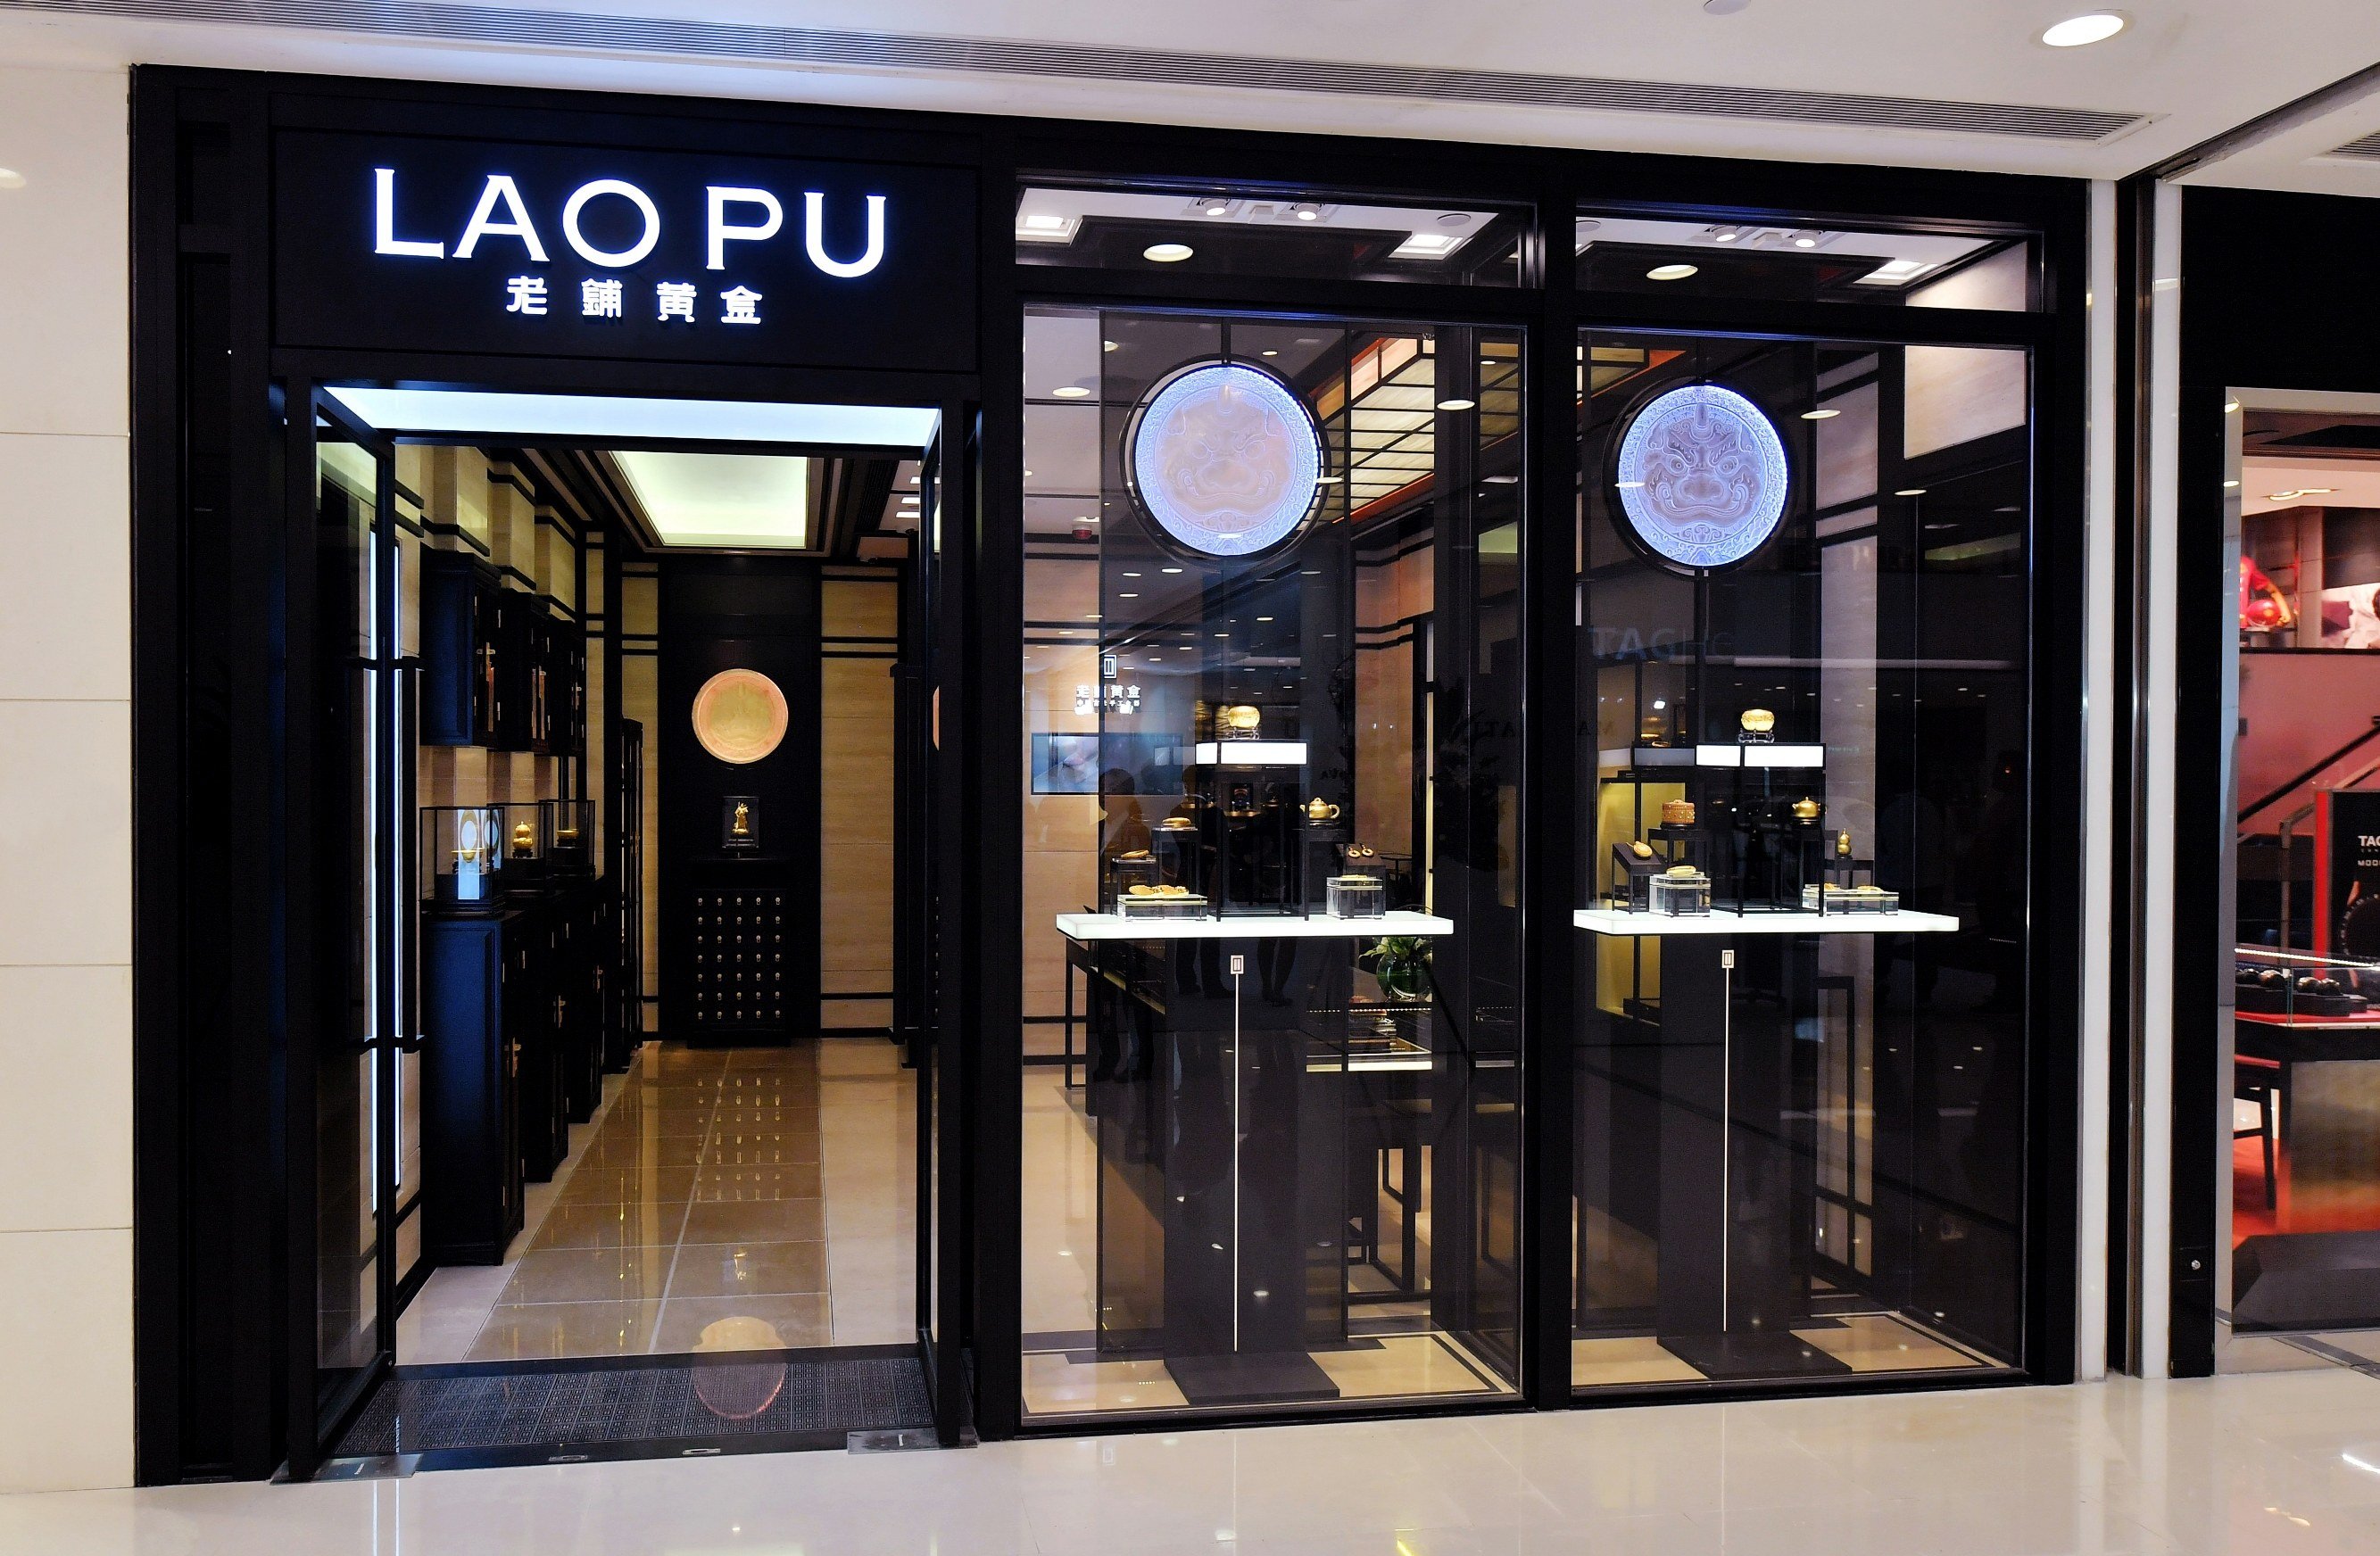 Beijing-based LaoPu Gold announced today its first Hong Kong store opening on September 13, at a major shopping centre in Tsim Sha Tsui. Photo: SCMP Pictures 